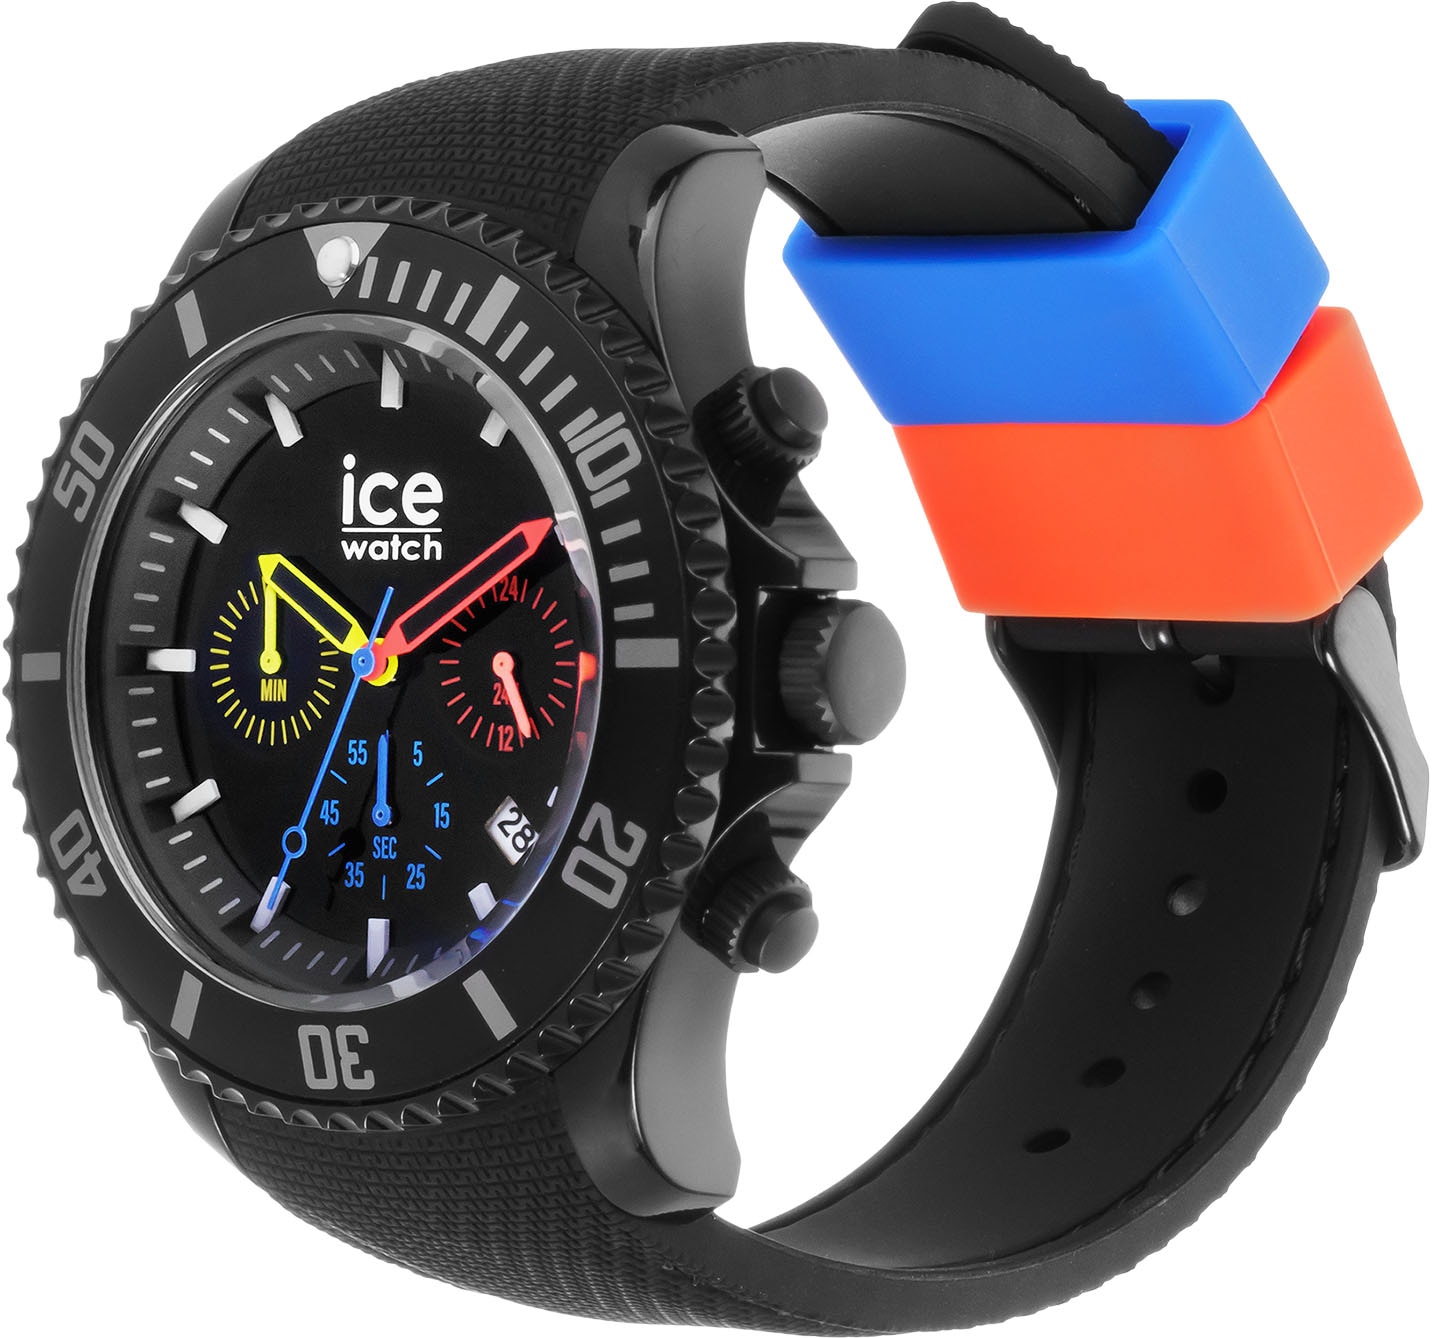 - ♕ 019842« Trilogy ice-watch »ICE bei - CH, - chrono Chronograph Large